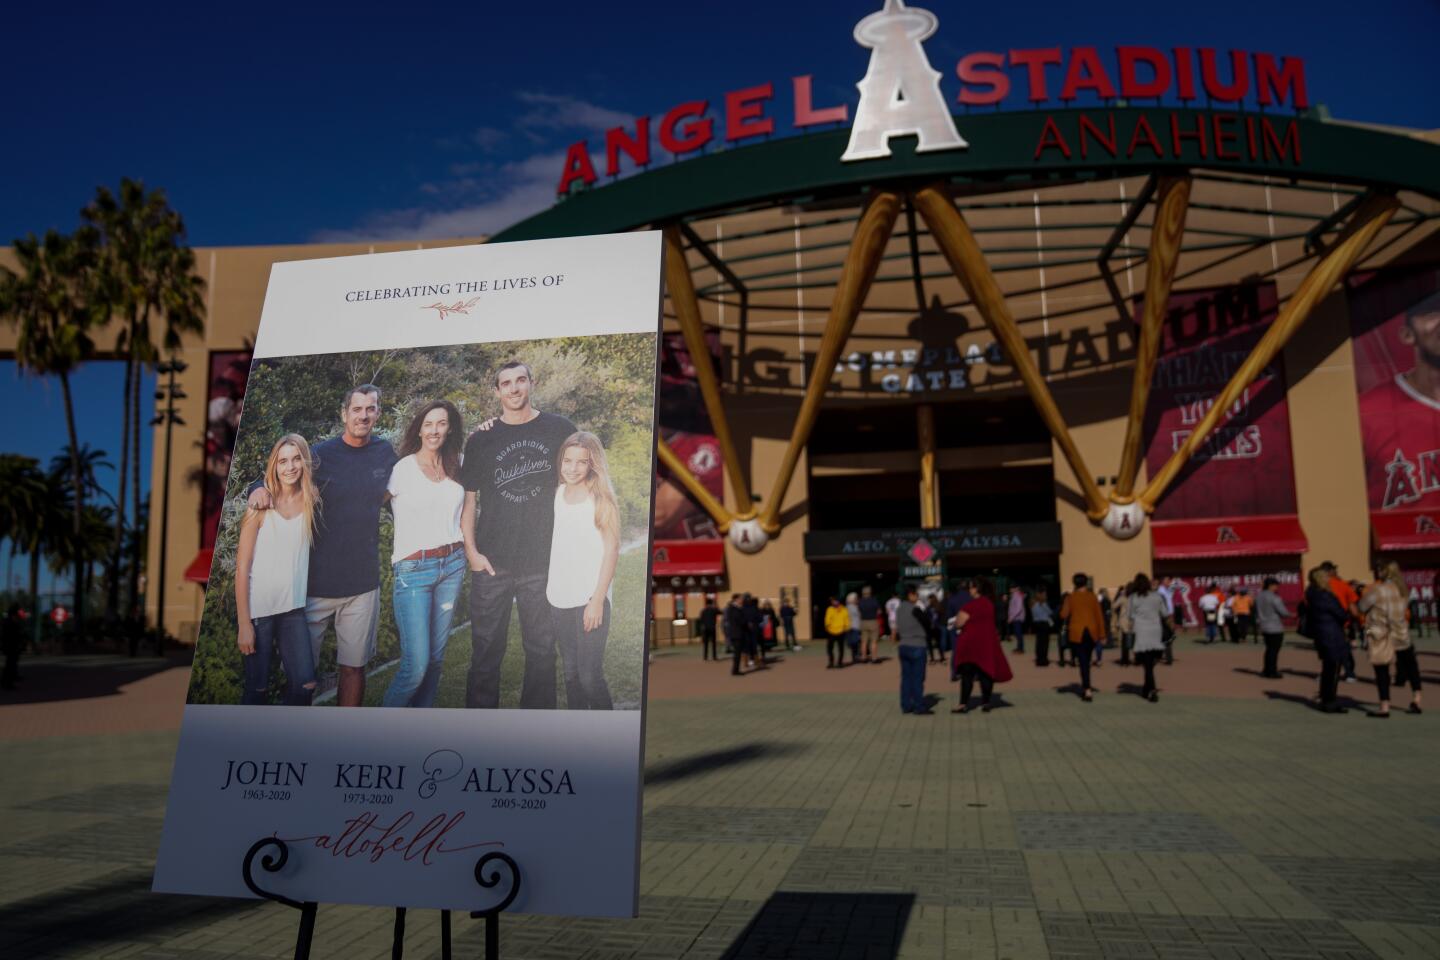 People wait outside the gates before the start of a celebration of life ceremony at Angel Stadium on Monday.